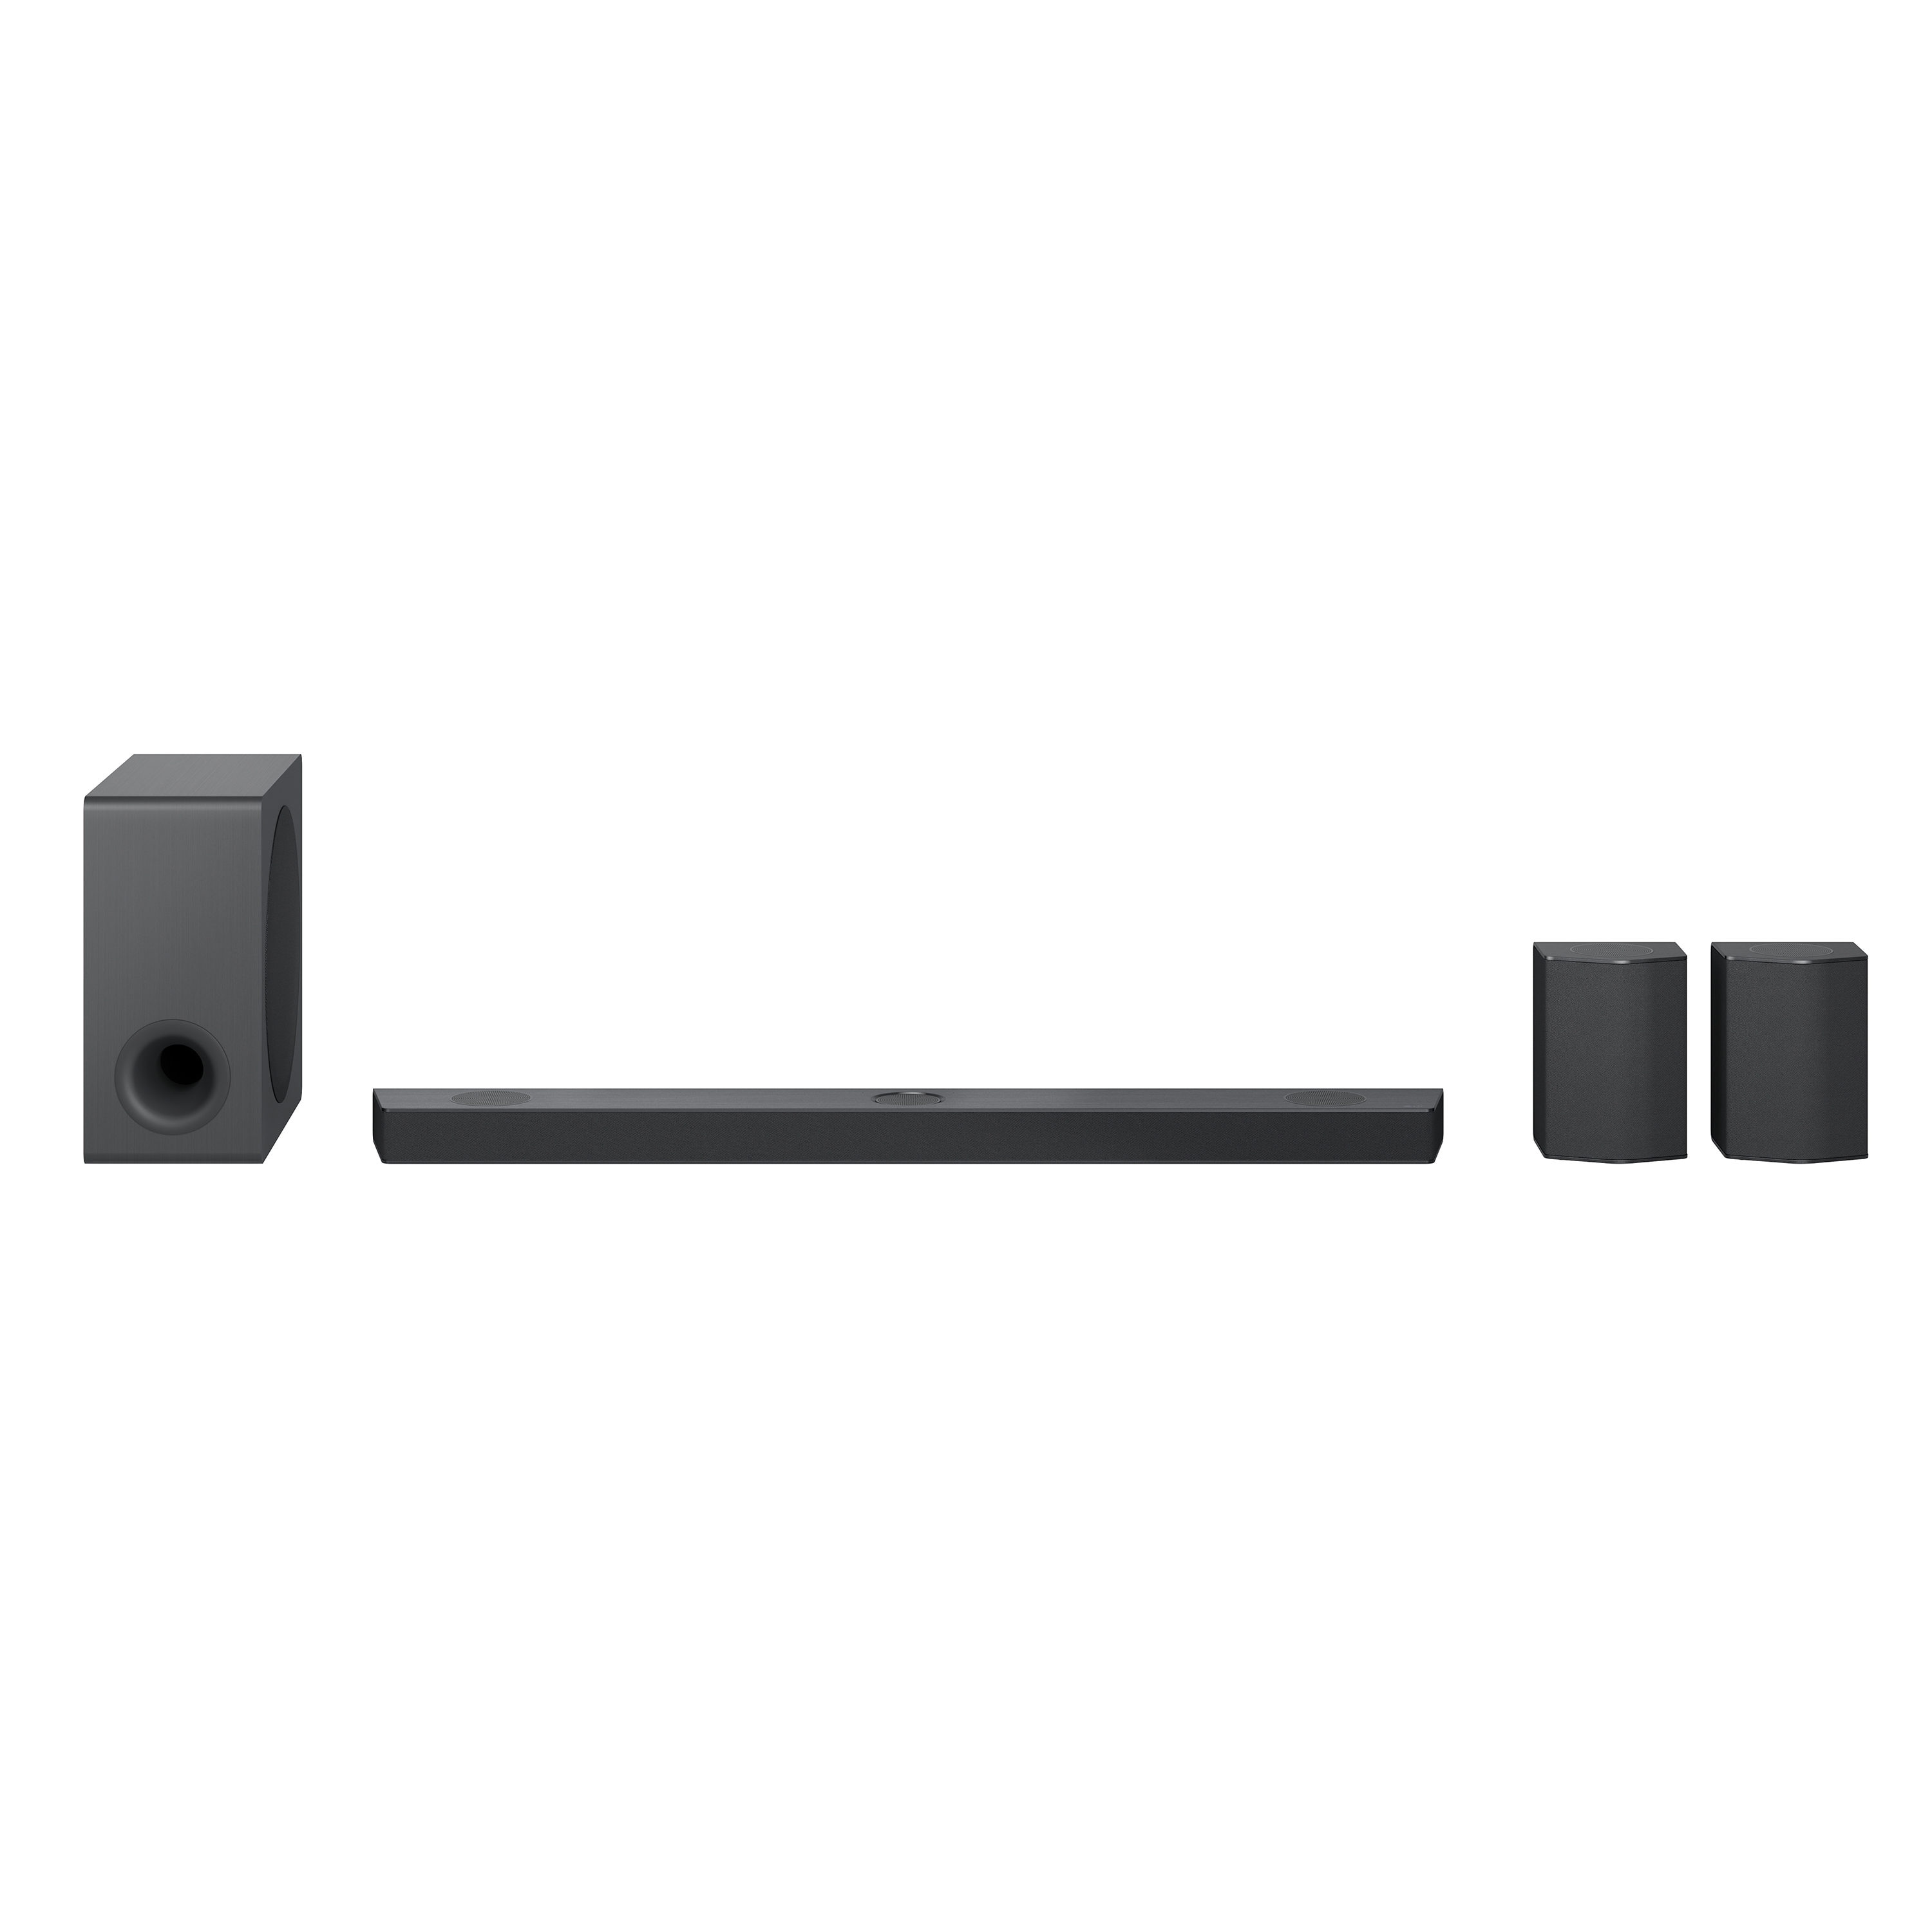 LG Sound Bar S95QR review: Atmospheric sound - Can Buy or Not